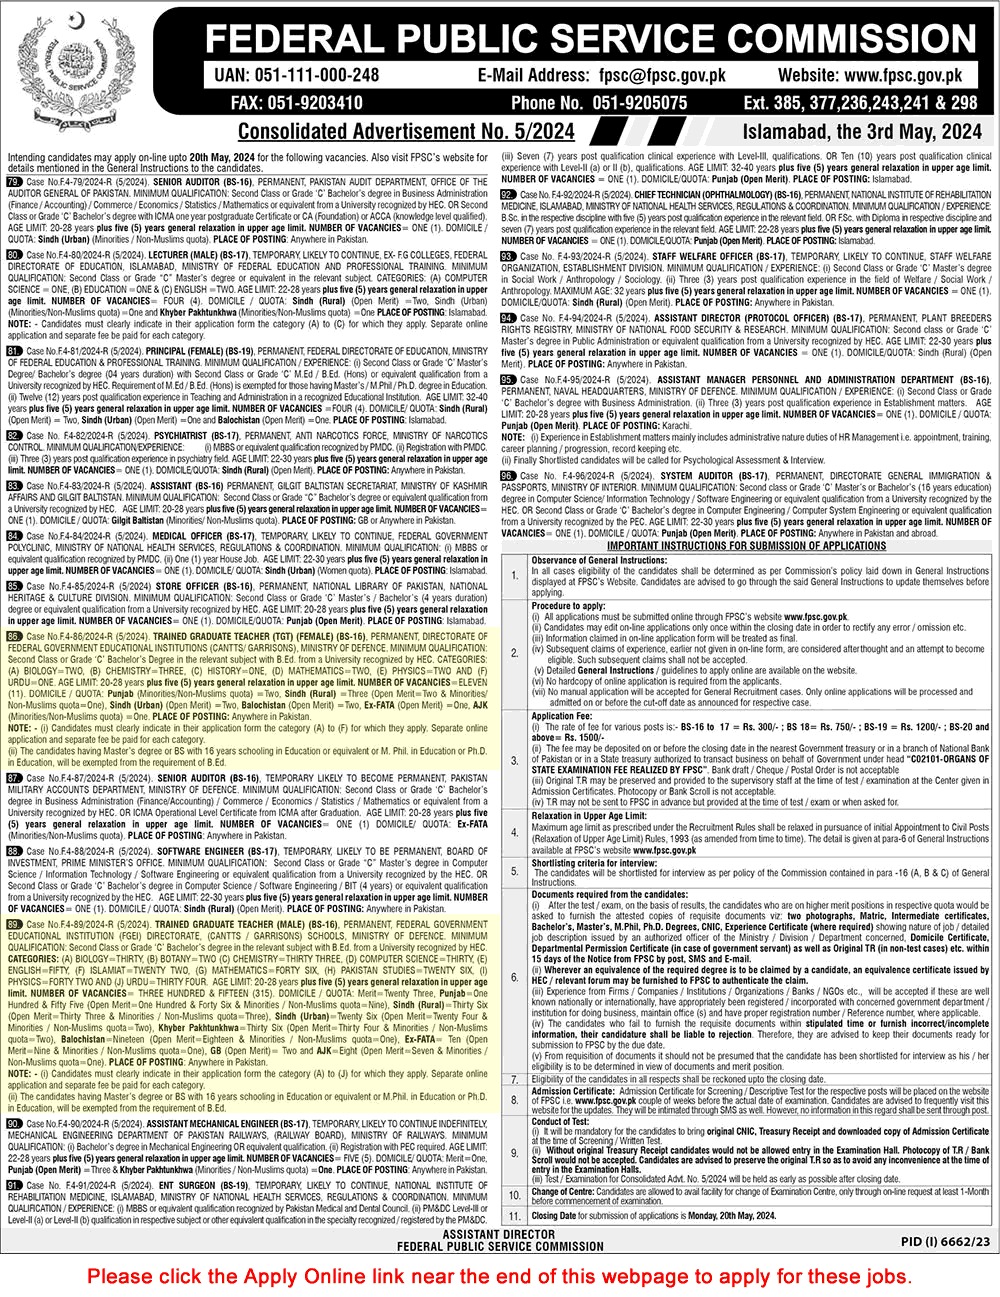 Federal Public Service Commission (FPSC) Consolidated Advertisement No. 5/2024: